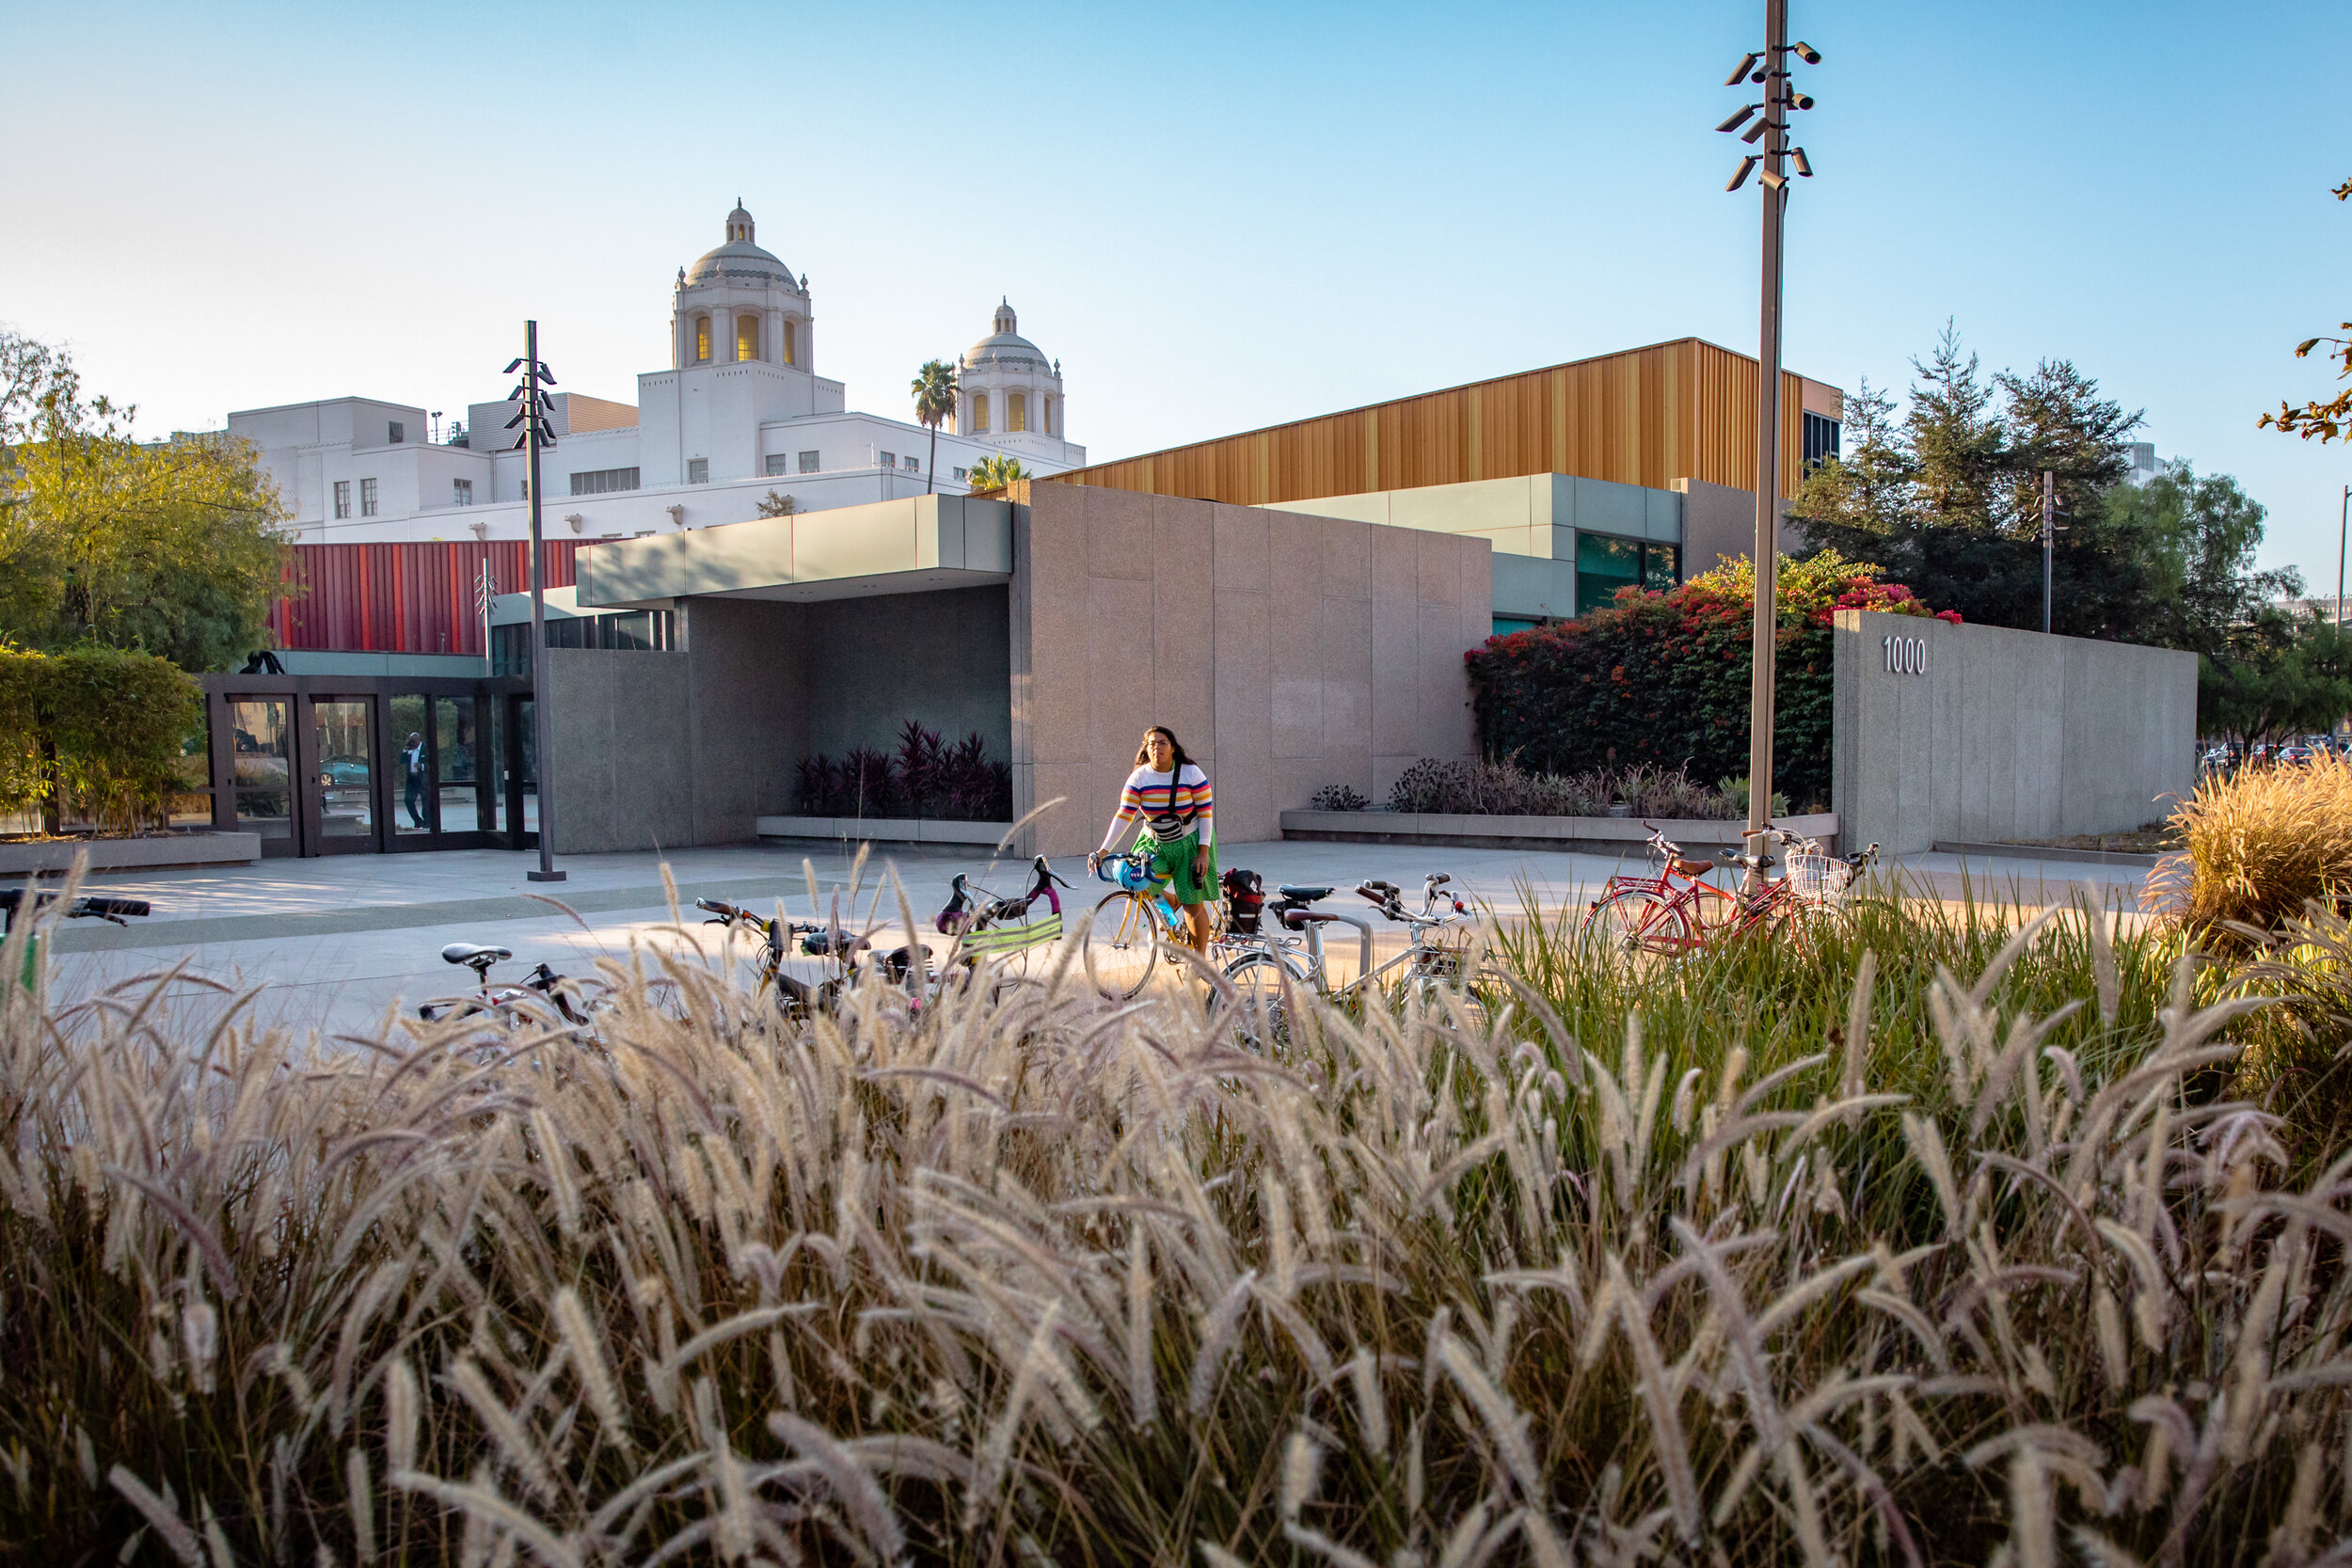  The 2019 California Bike Summit was held at the California Endowment in Los Angeles. 